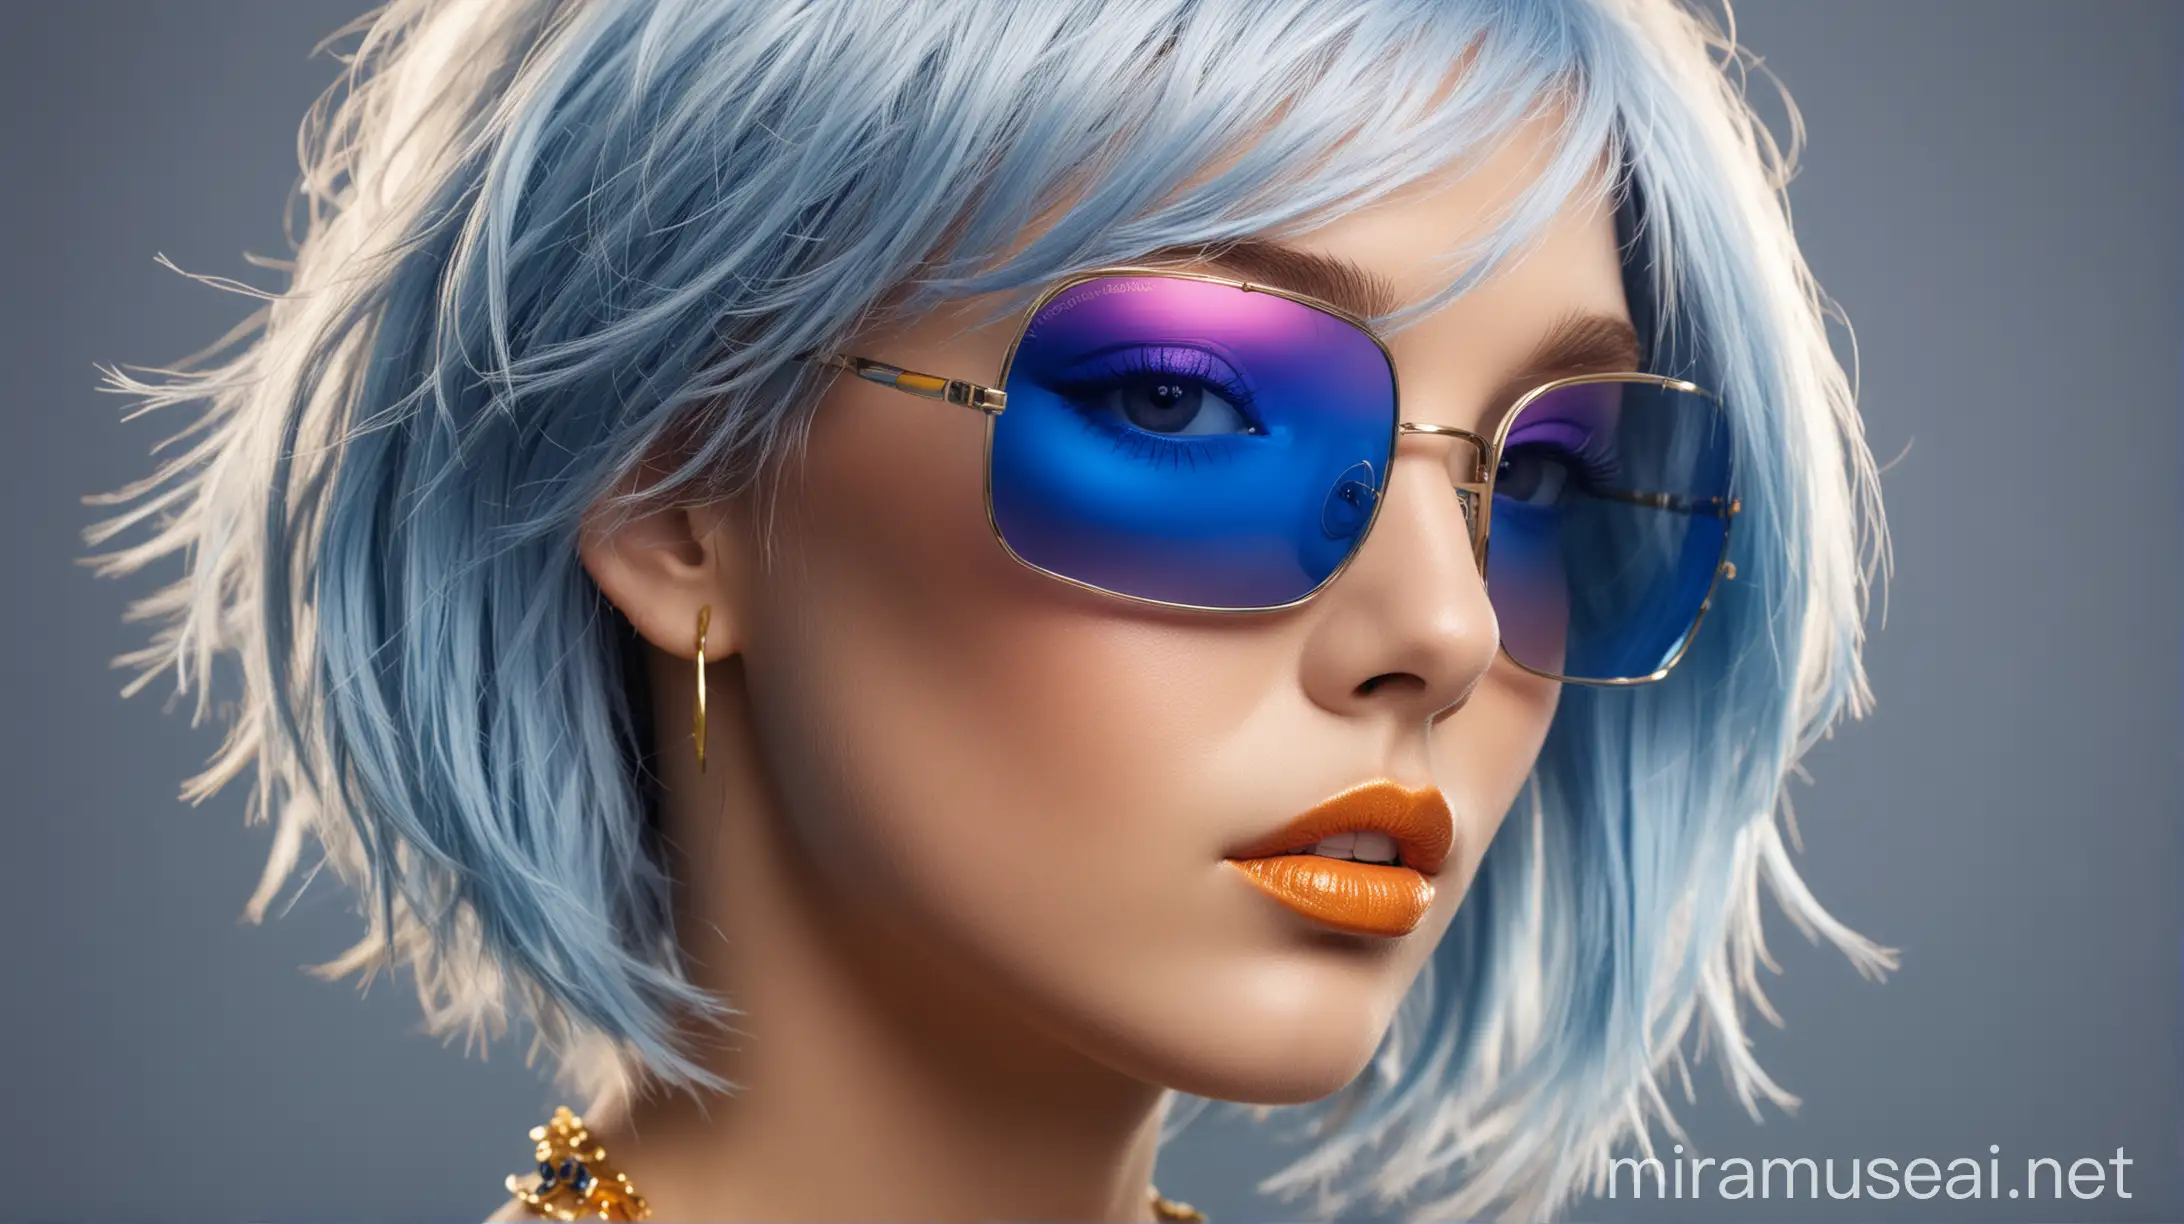 Colorful Sunglass Fashion Portrait with Silver and Blue Hair